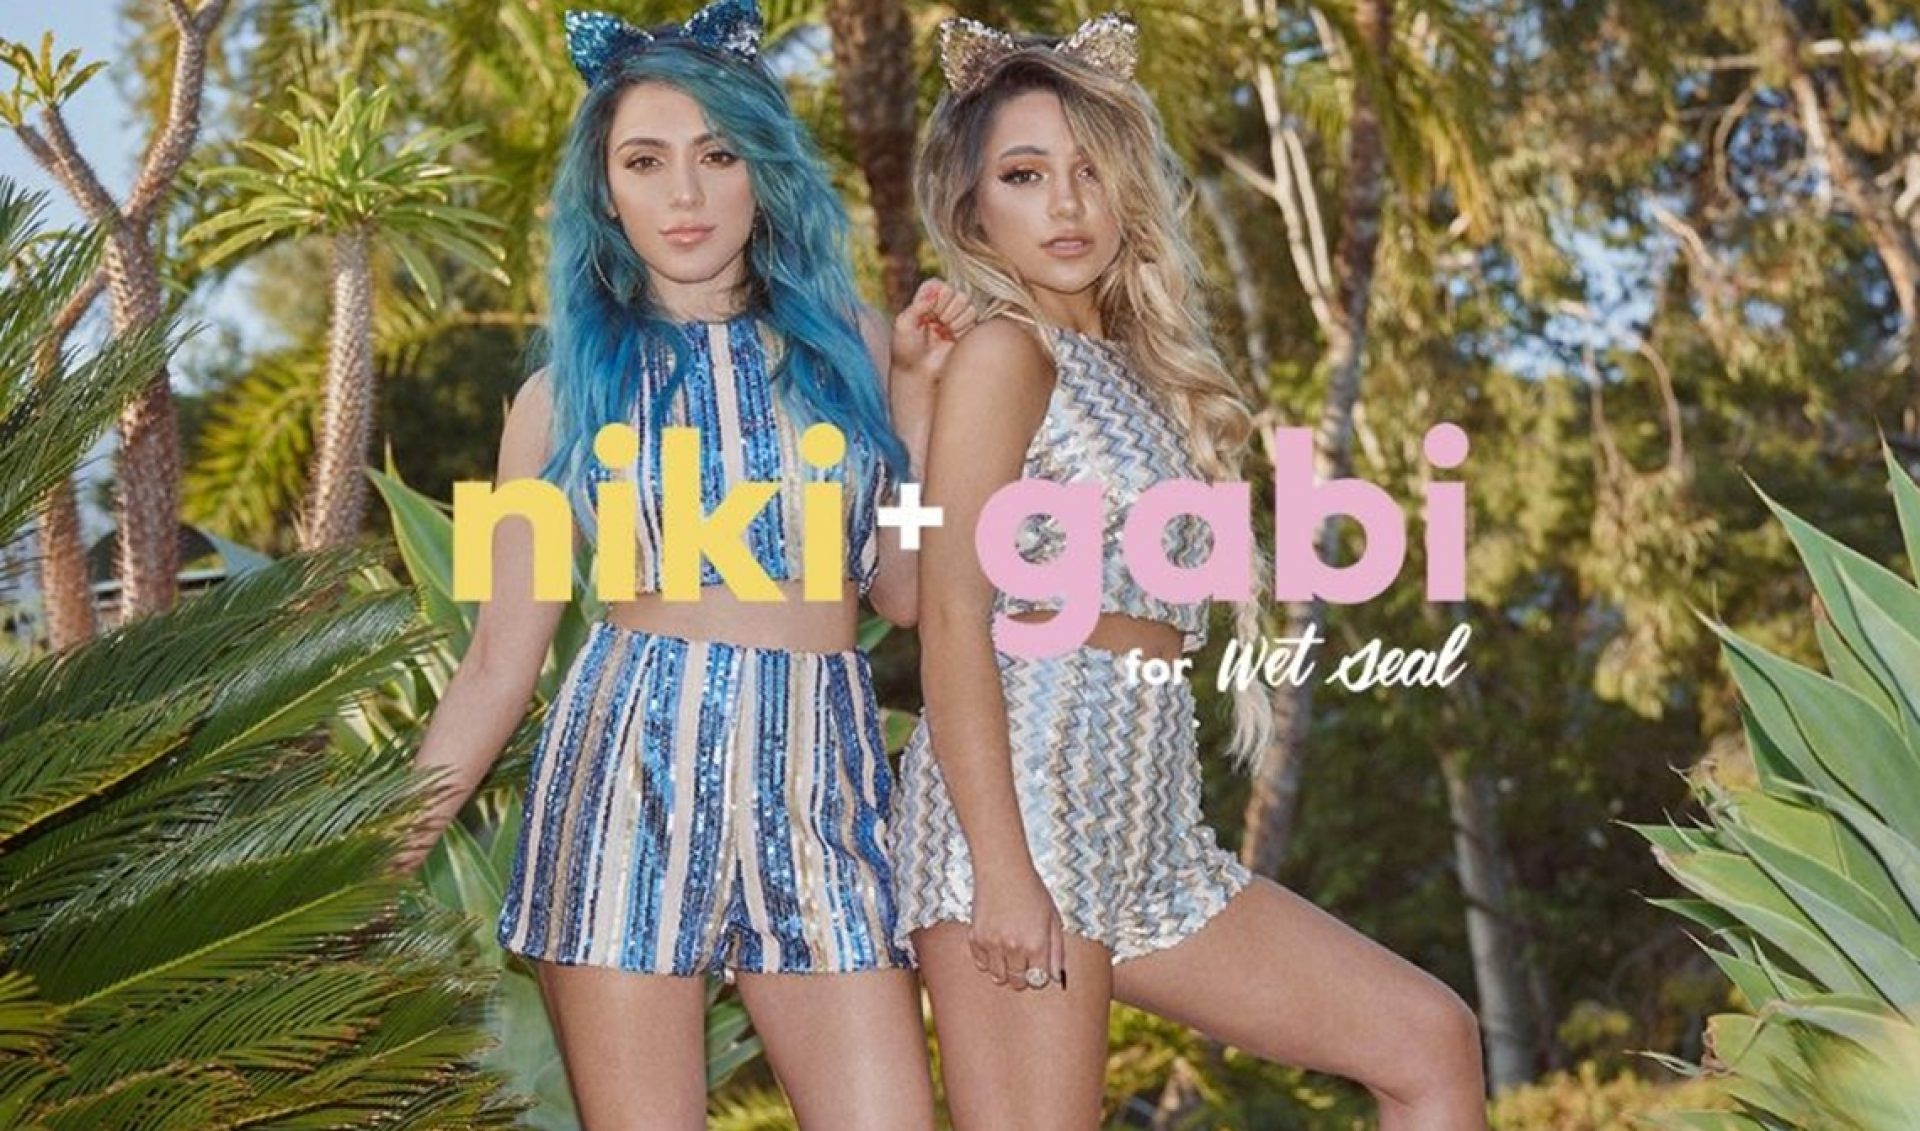 Days After Launching Hair Extension Line, Niki And Gabi Announce Wet Seal Fashion Collab